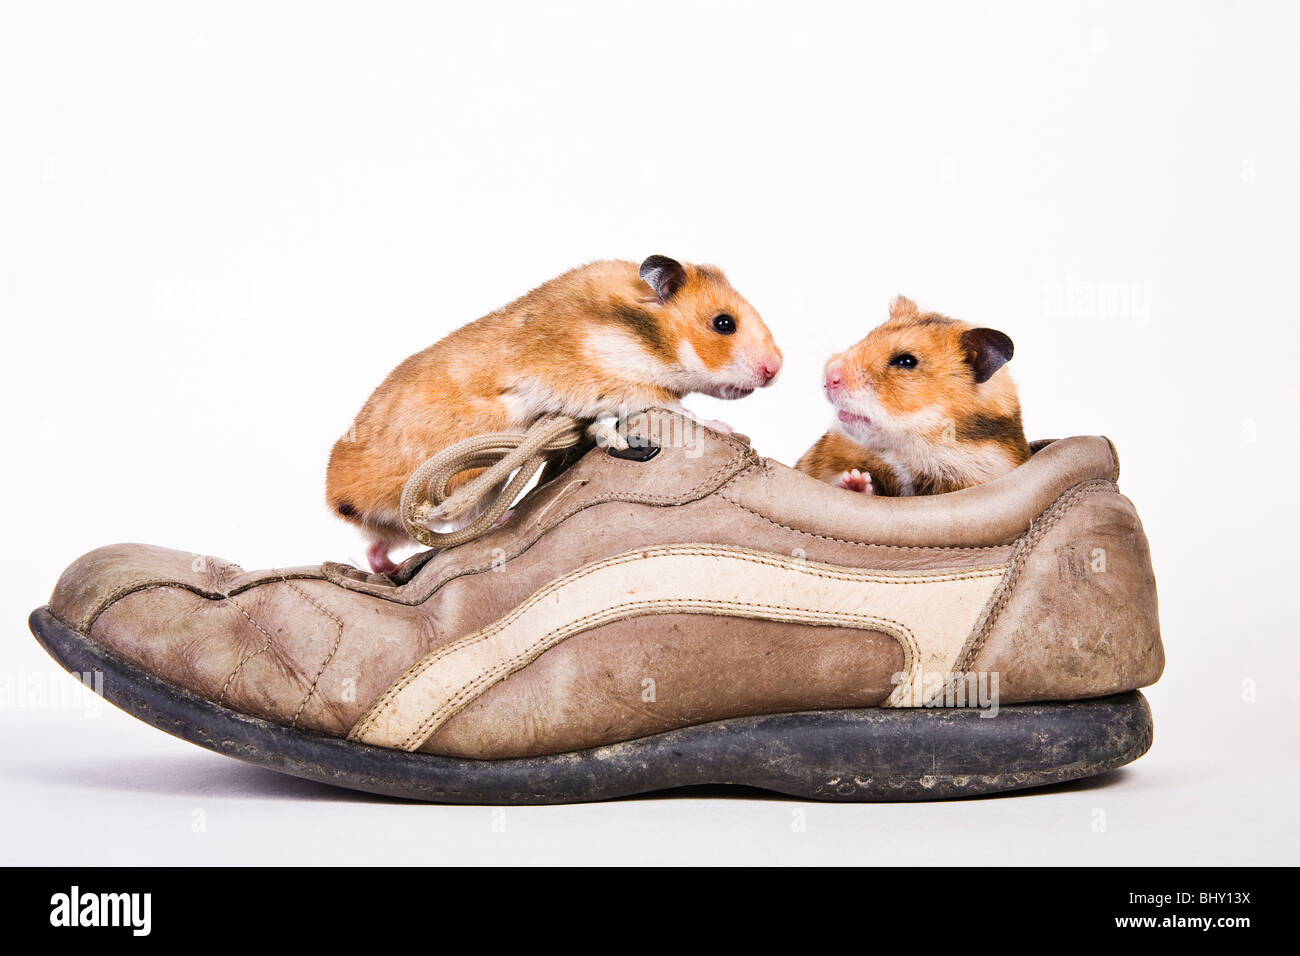 Golden hamsters in a shoe Stock Photo